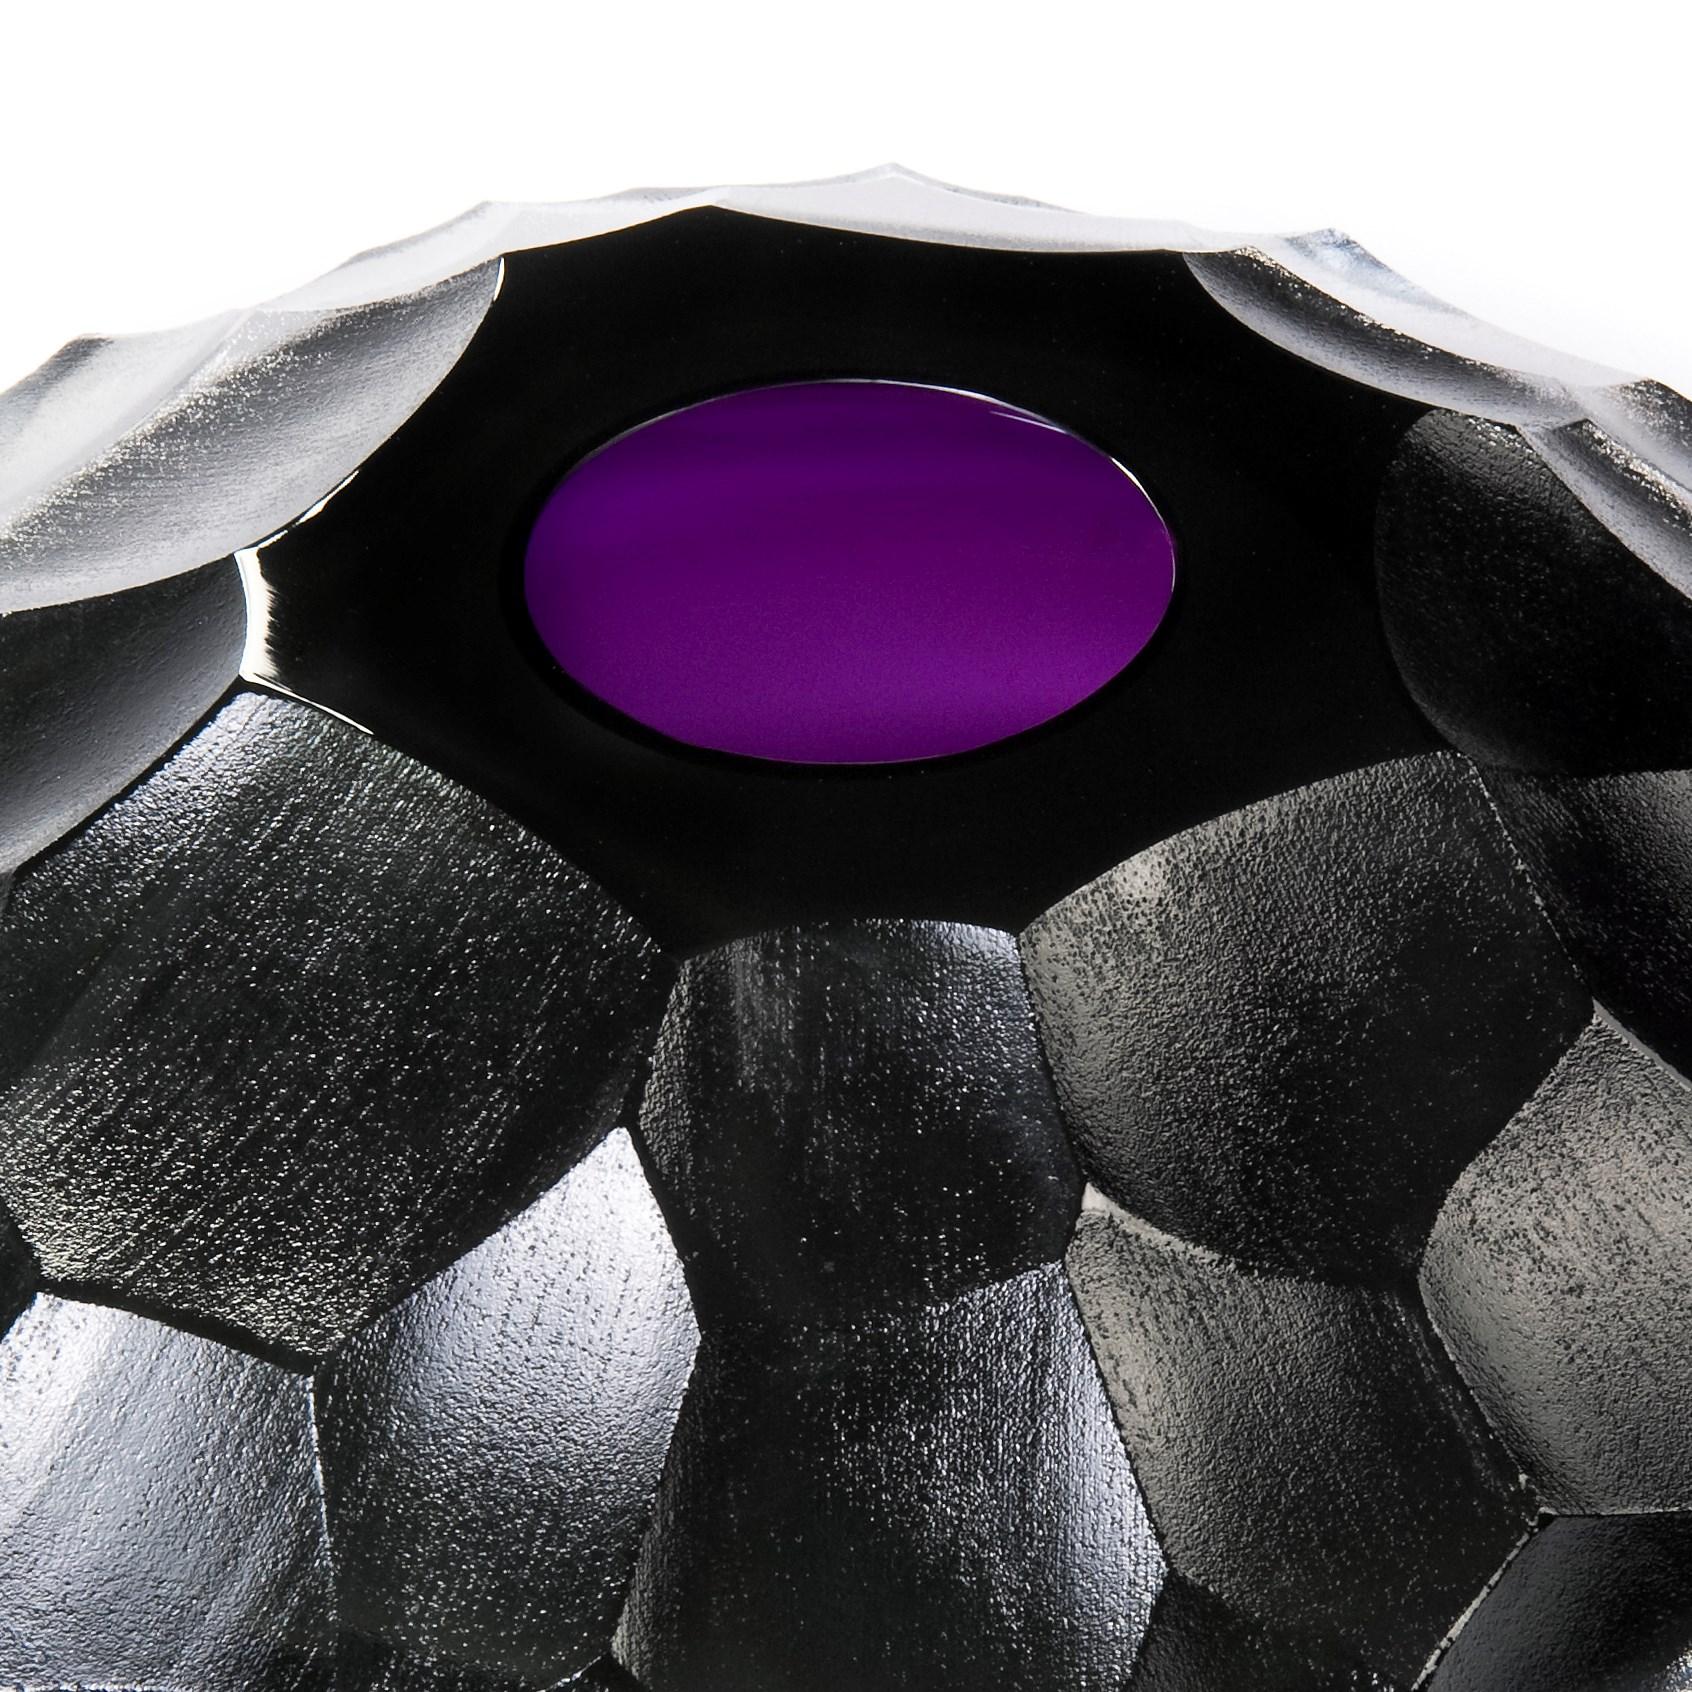 Hand-Crafted  Turtle Jewel, a faceted cut purple glass centrepiece / vase by  Lena Bergström For Sale